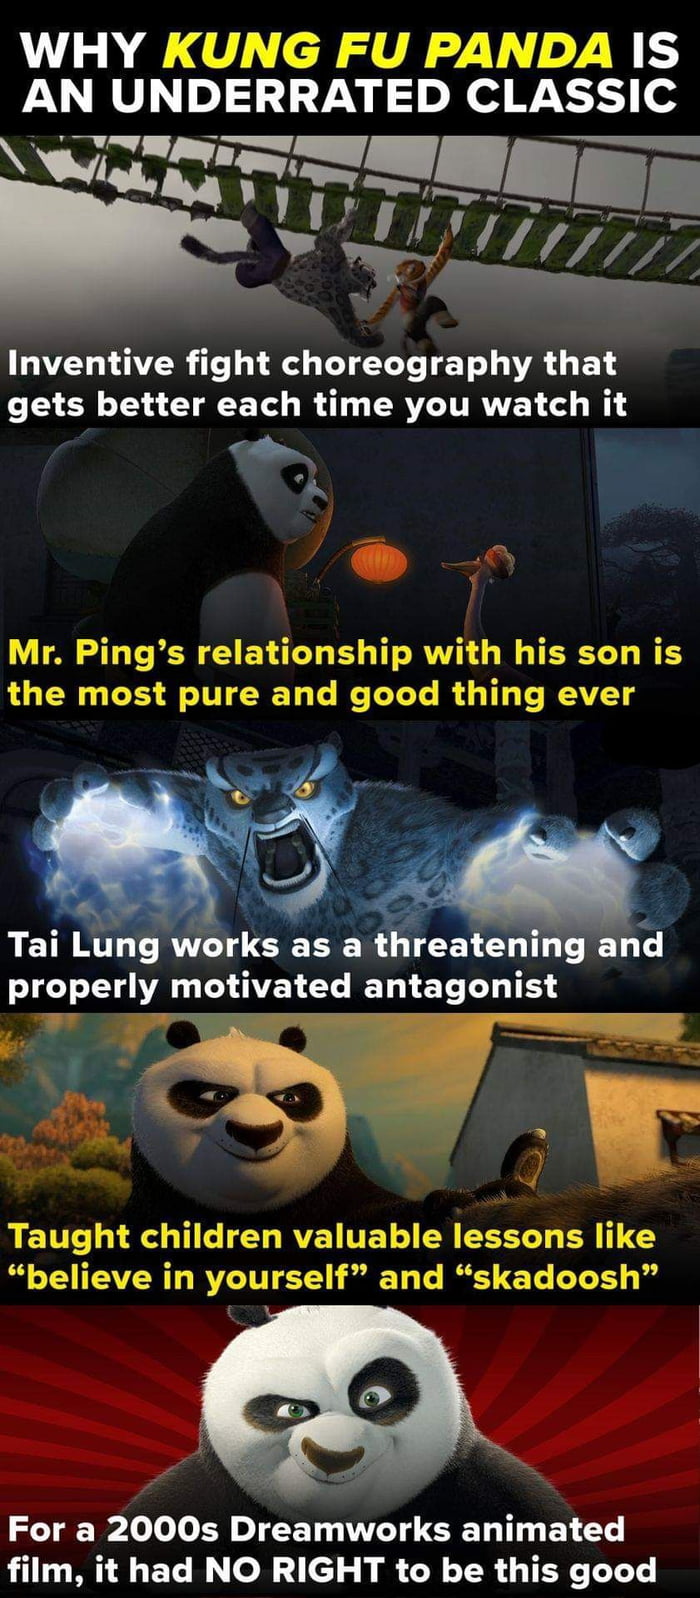 why kung fu panda is an underrated classic, inventive fight choreography that gets better each time you watch it, mr ping's relationship with his son is the most pure and good thing ever